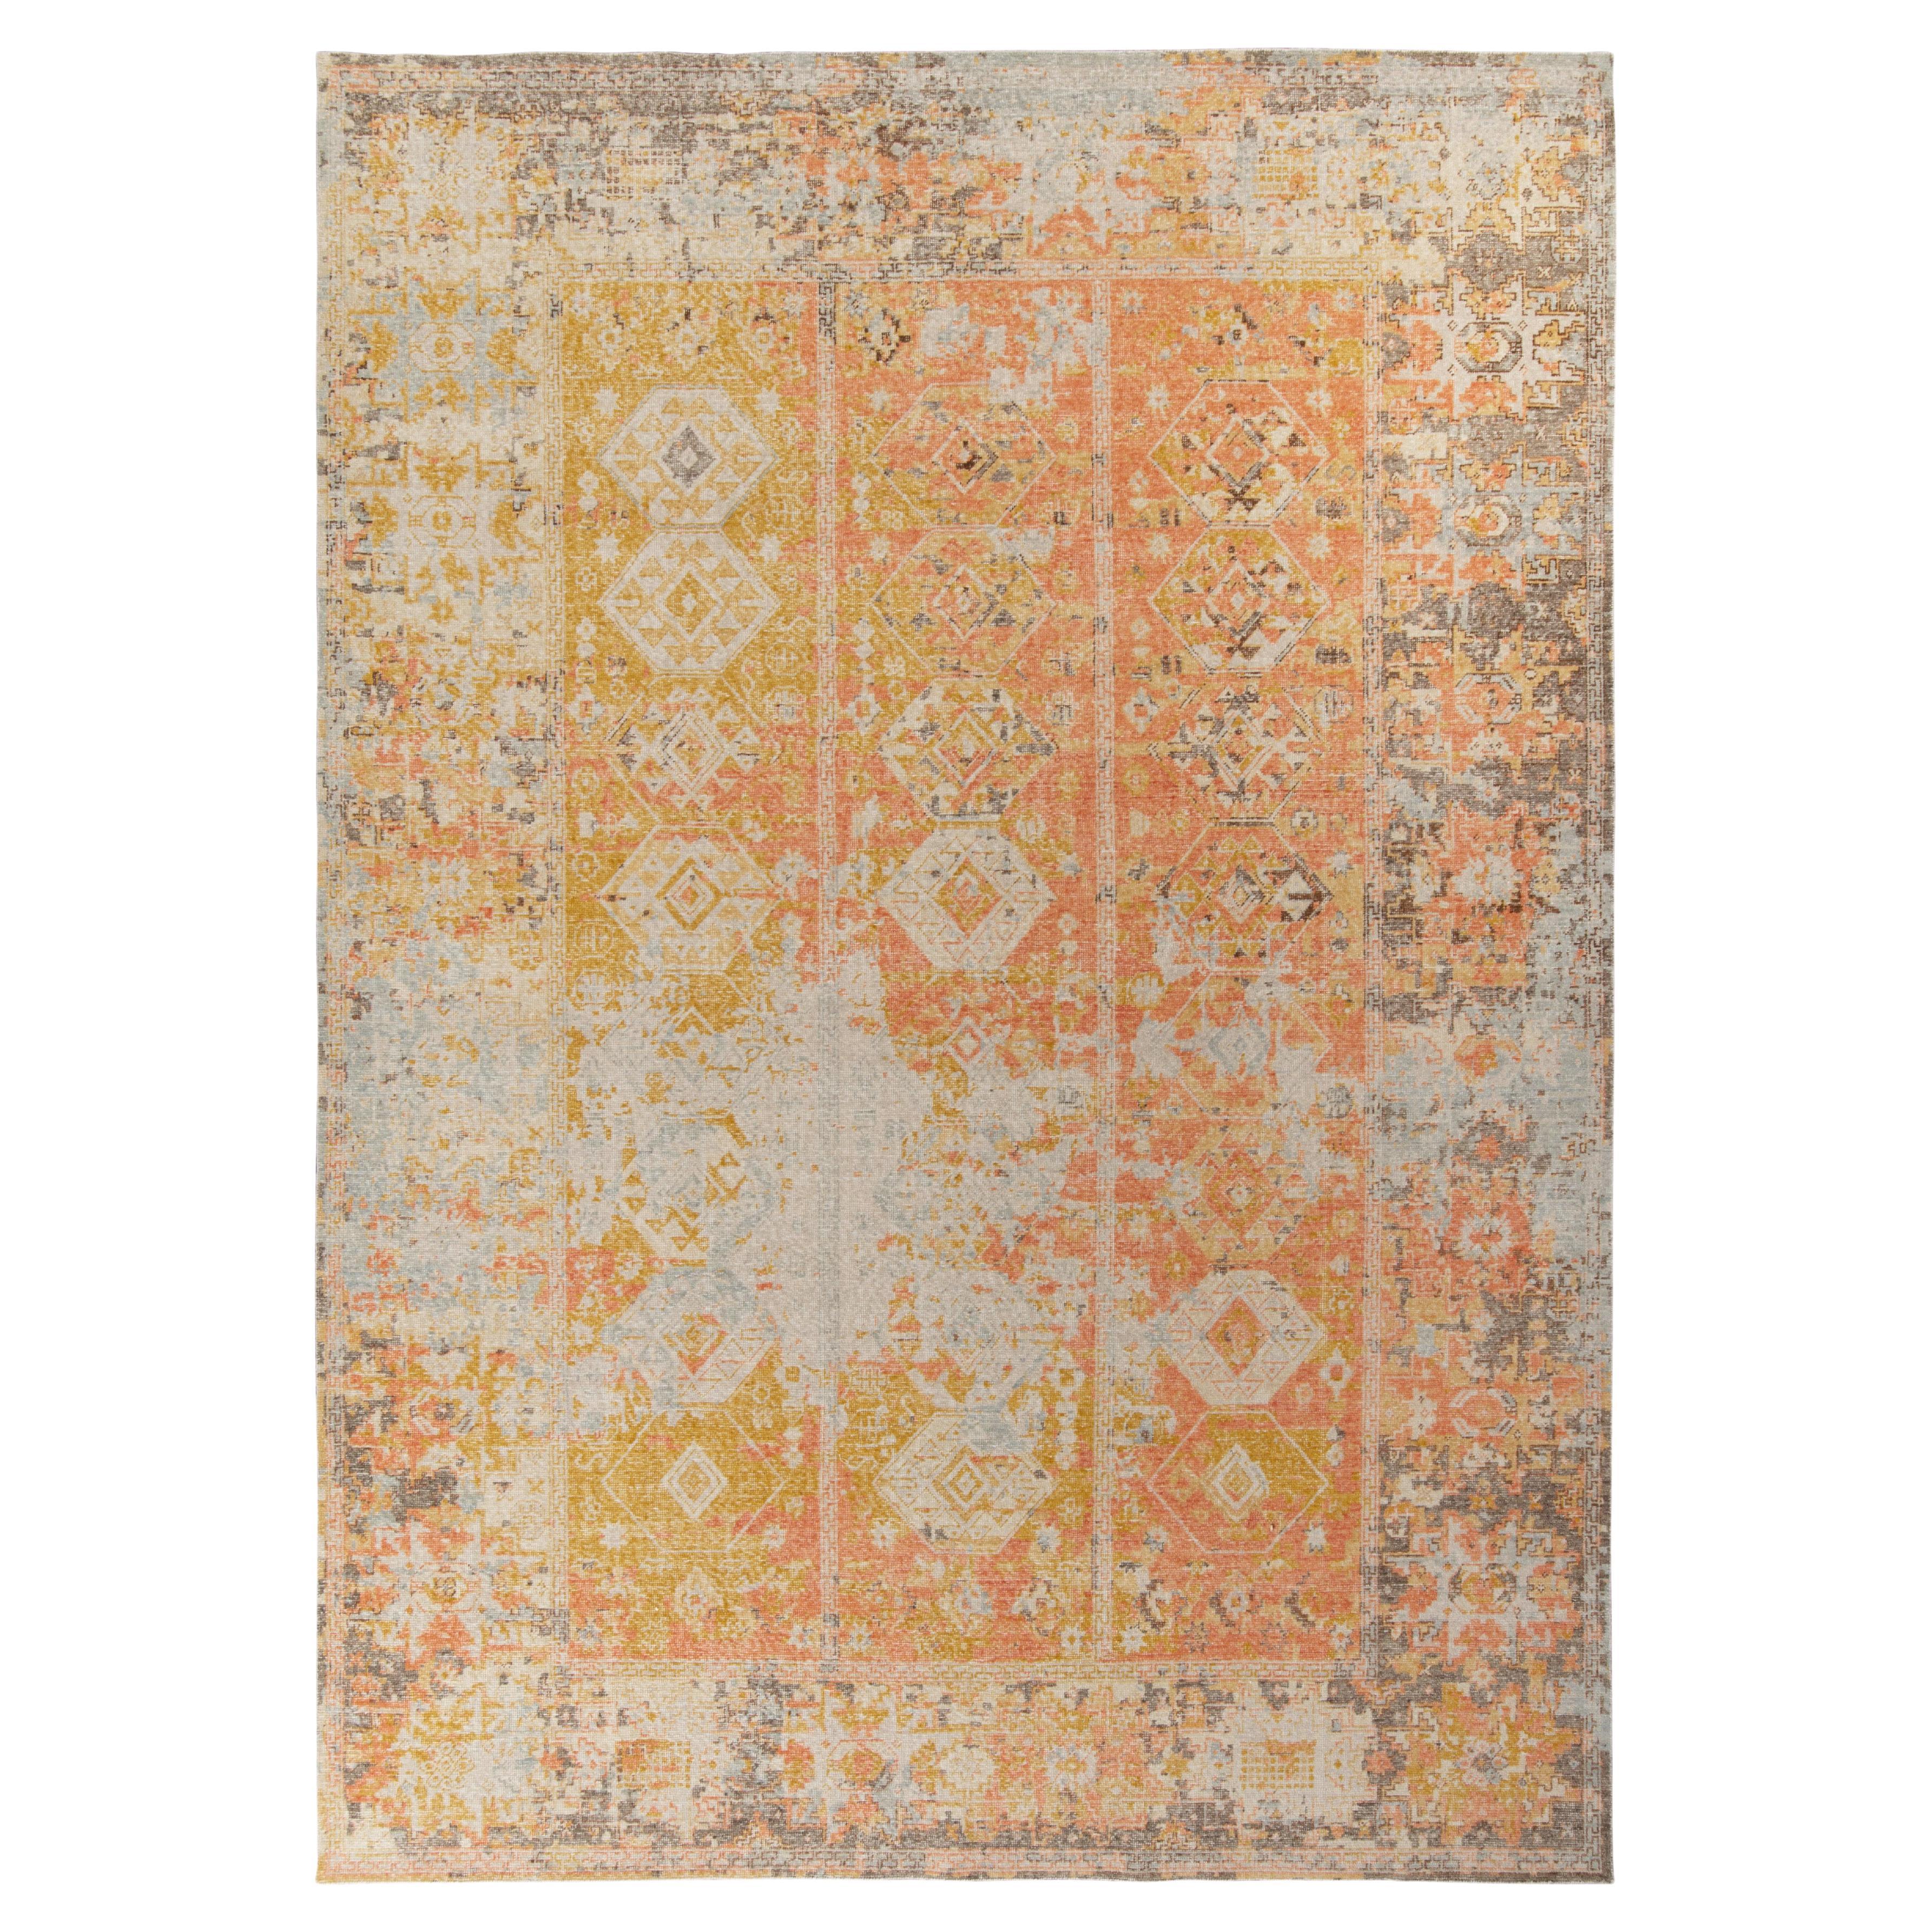 Rug & Kilim’s Distressed Tribal Style Custom Rug in Yellow, Red Geometric Patter